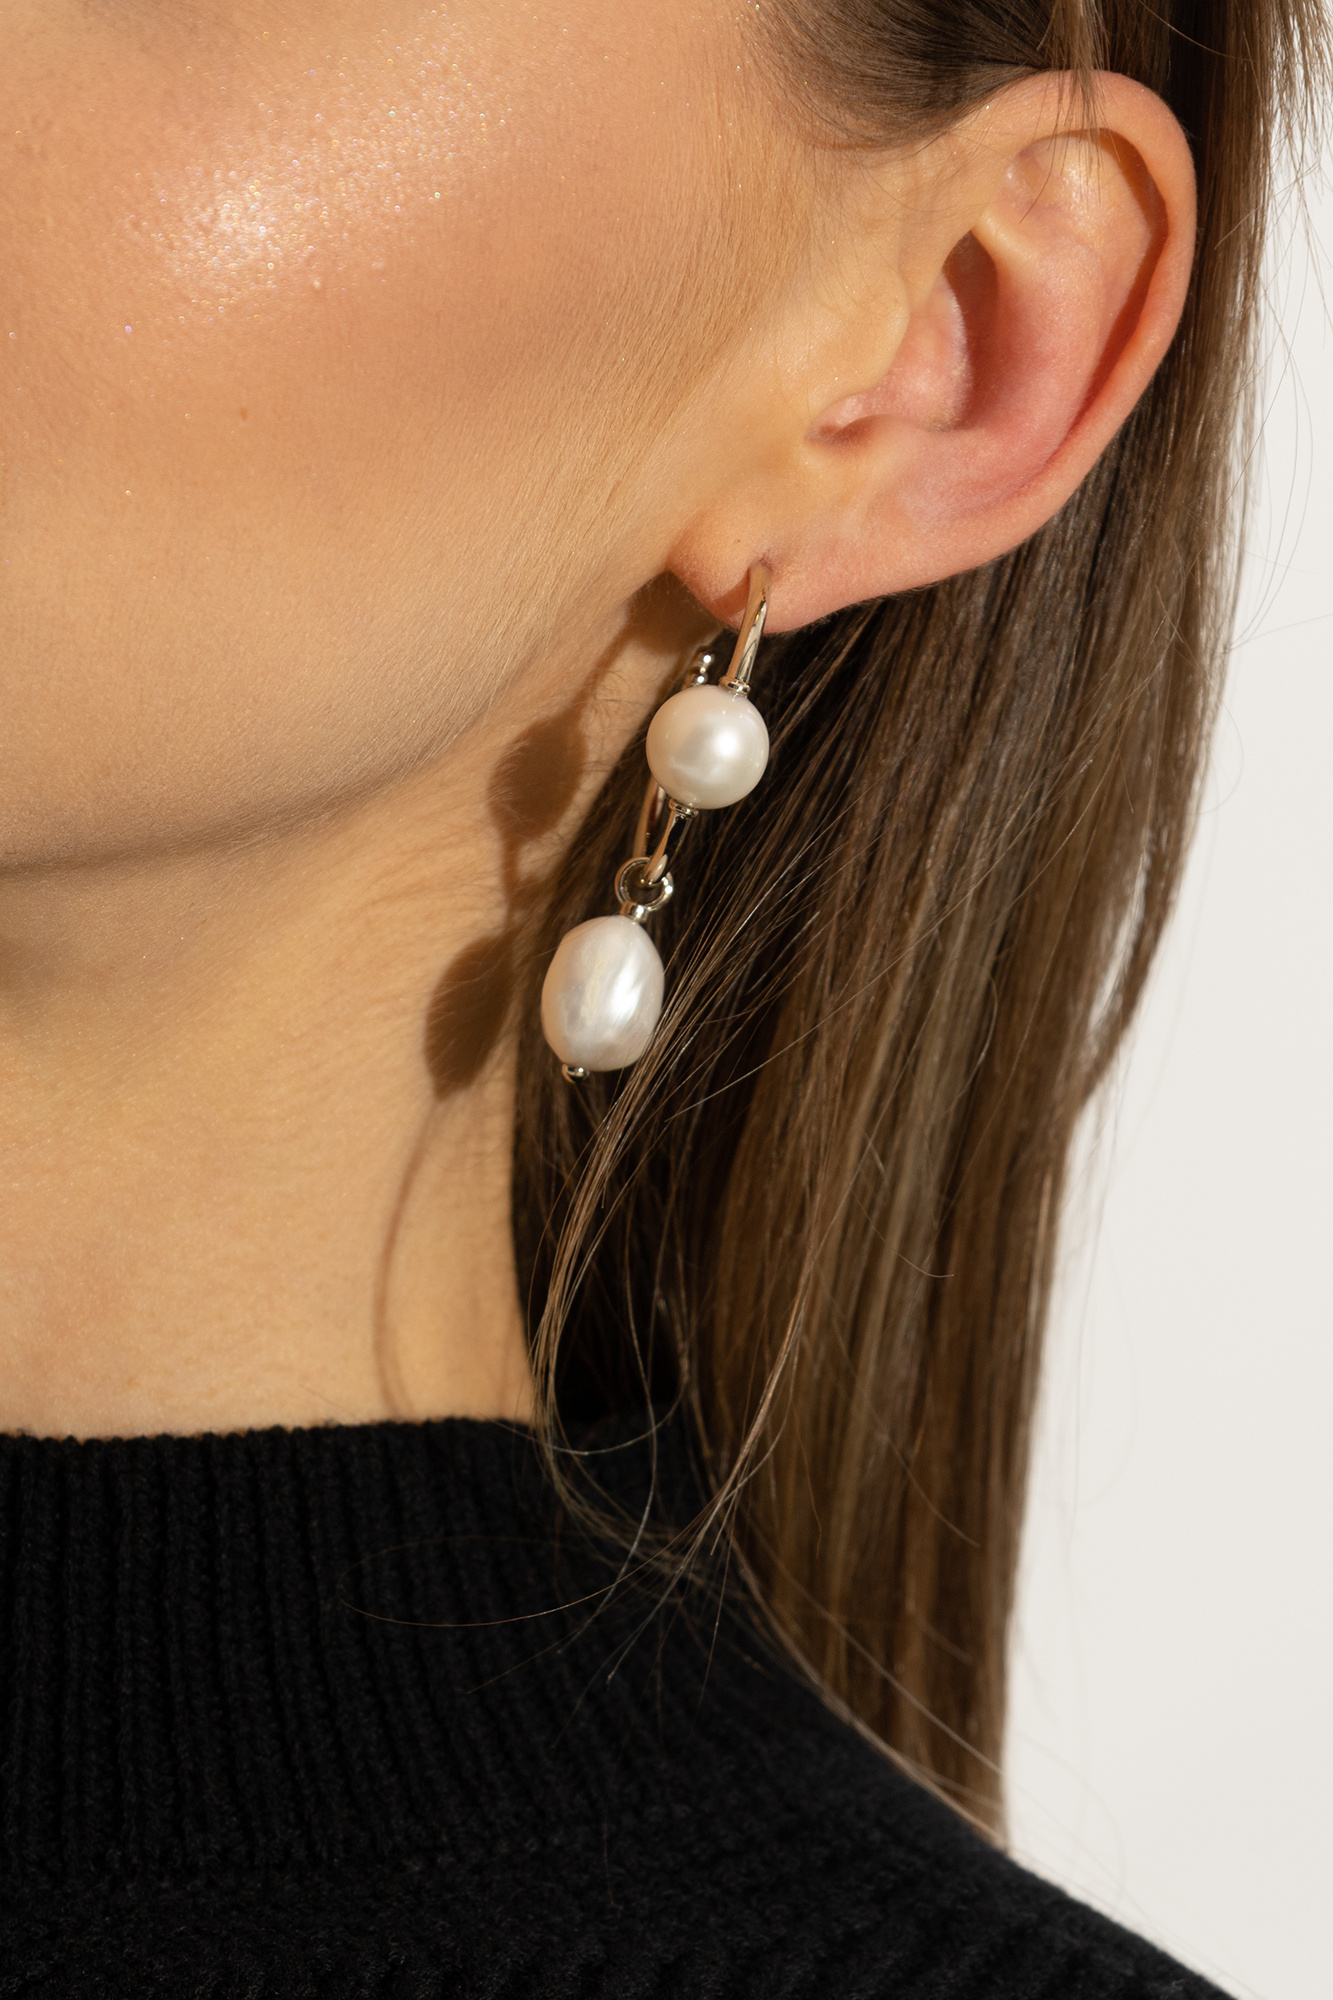 Chloé Hoop earrings of different sizes